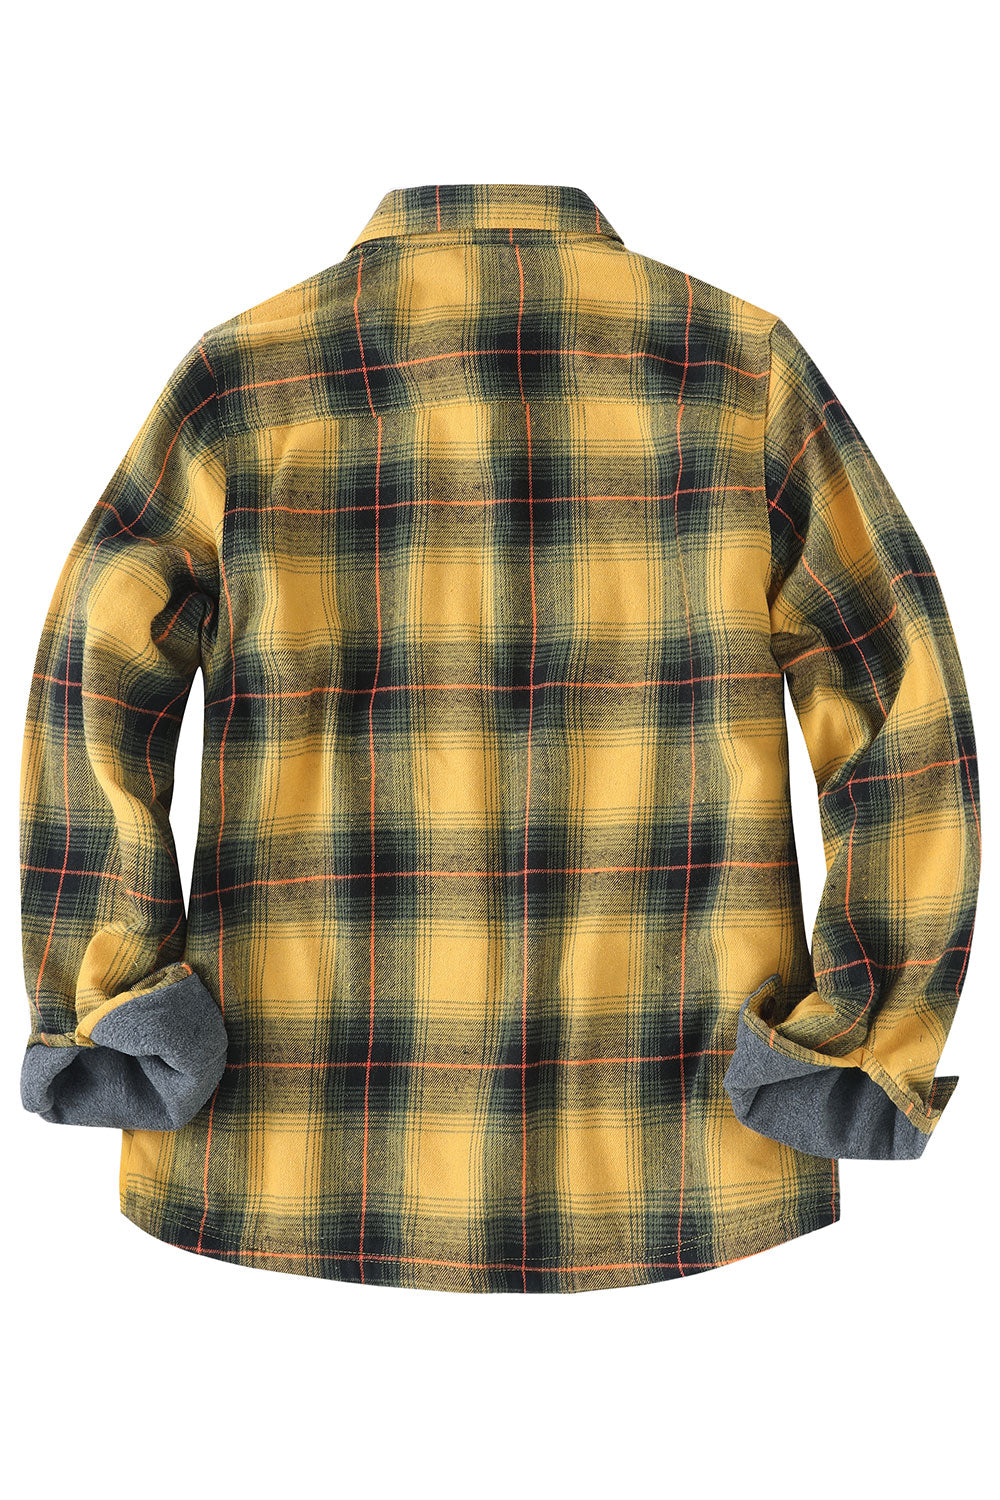 ZENTHACE Women's Thermal Fleece Lined Plaid Button Down Flannel